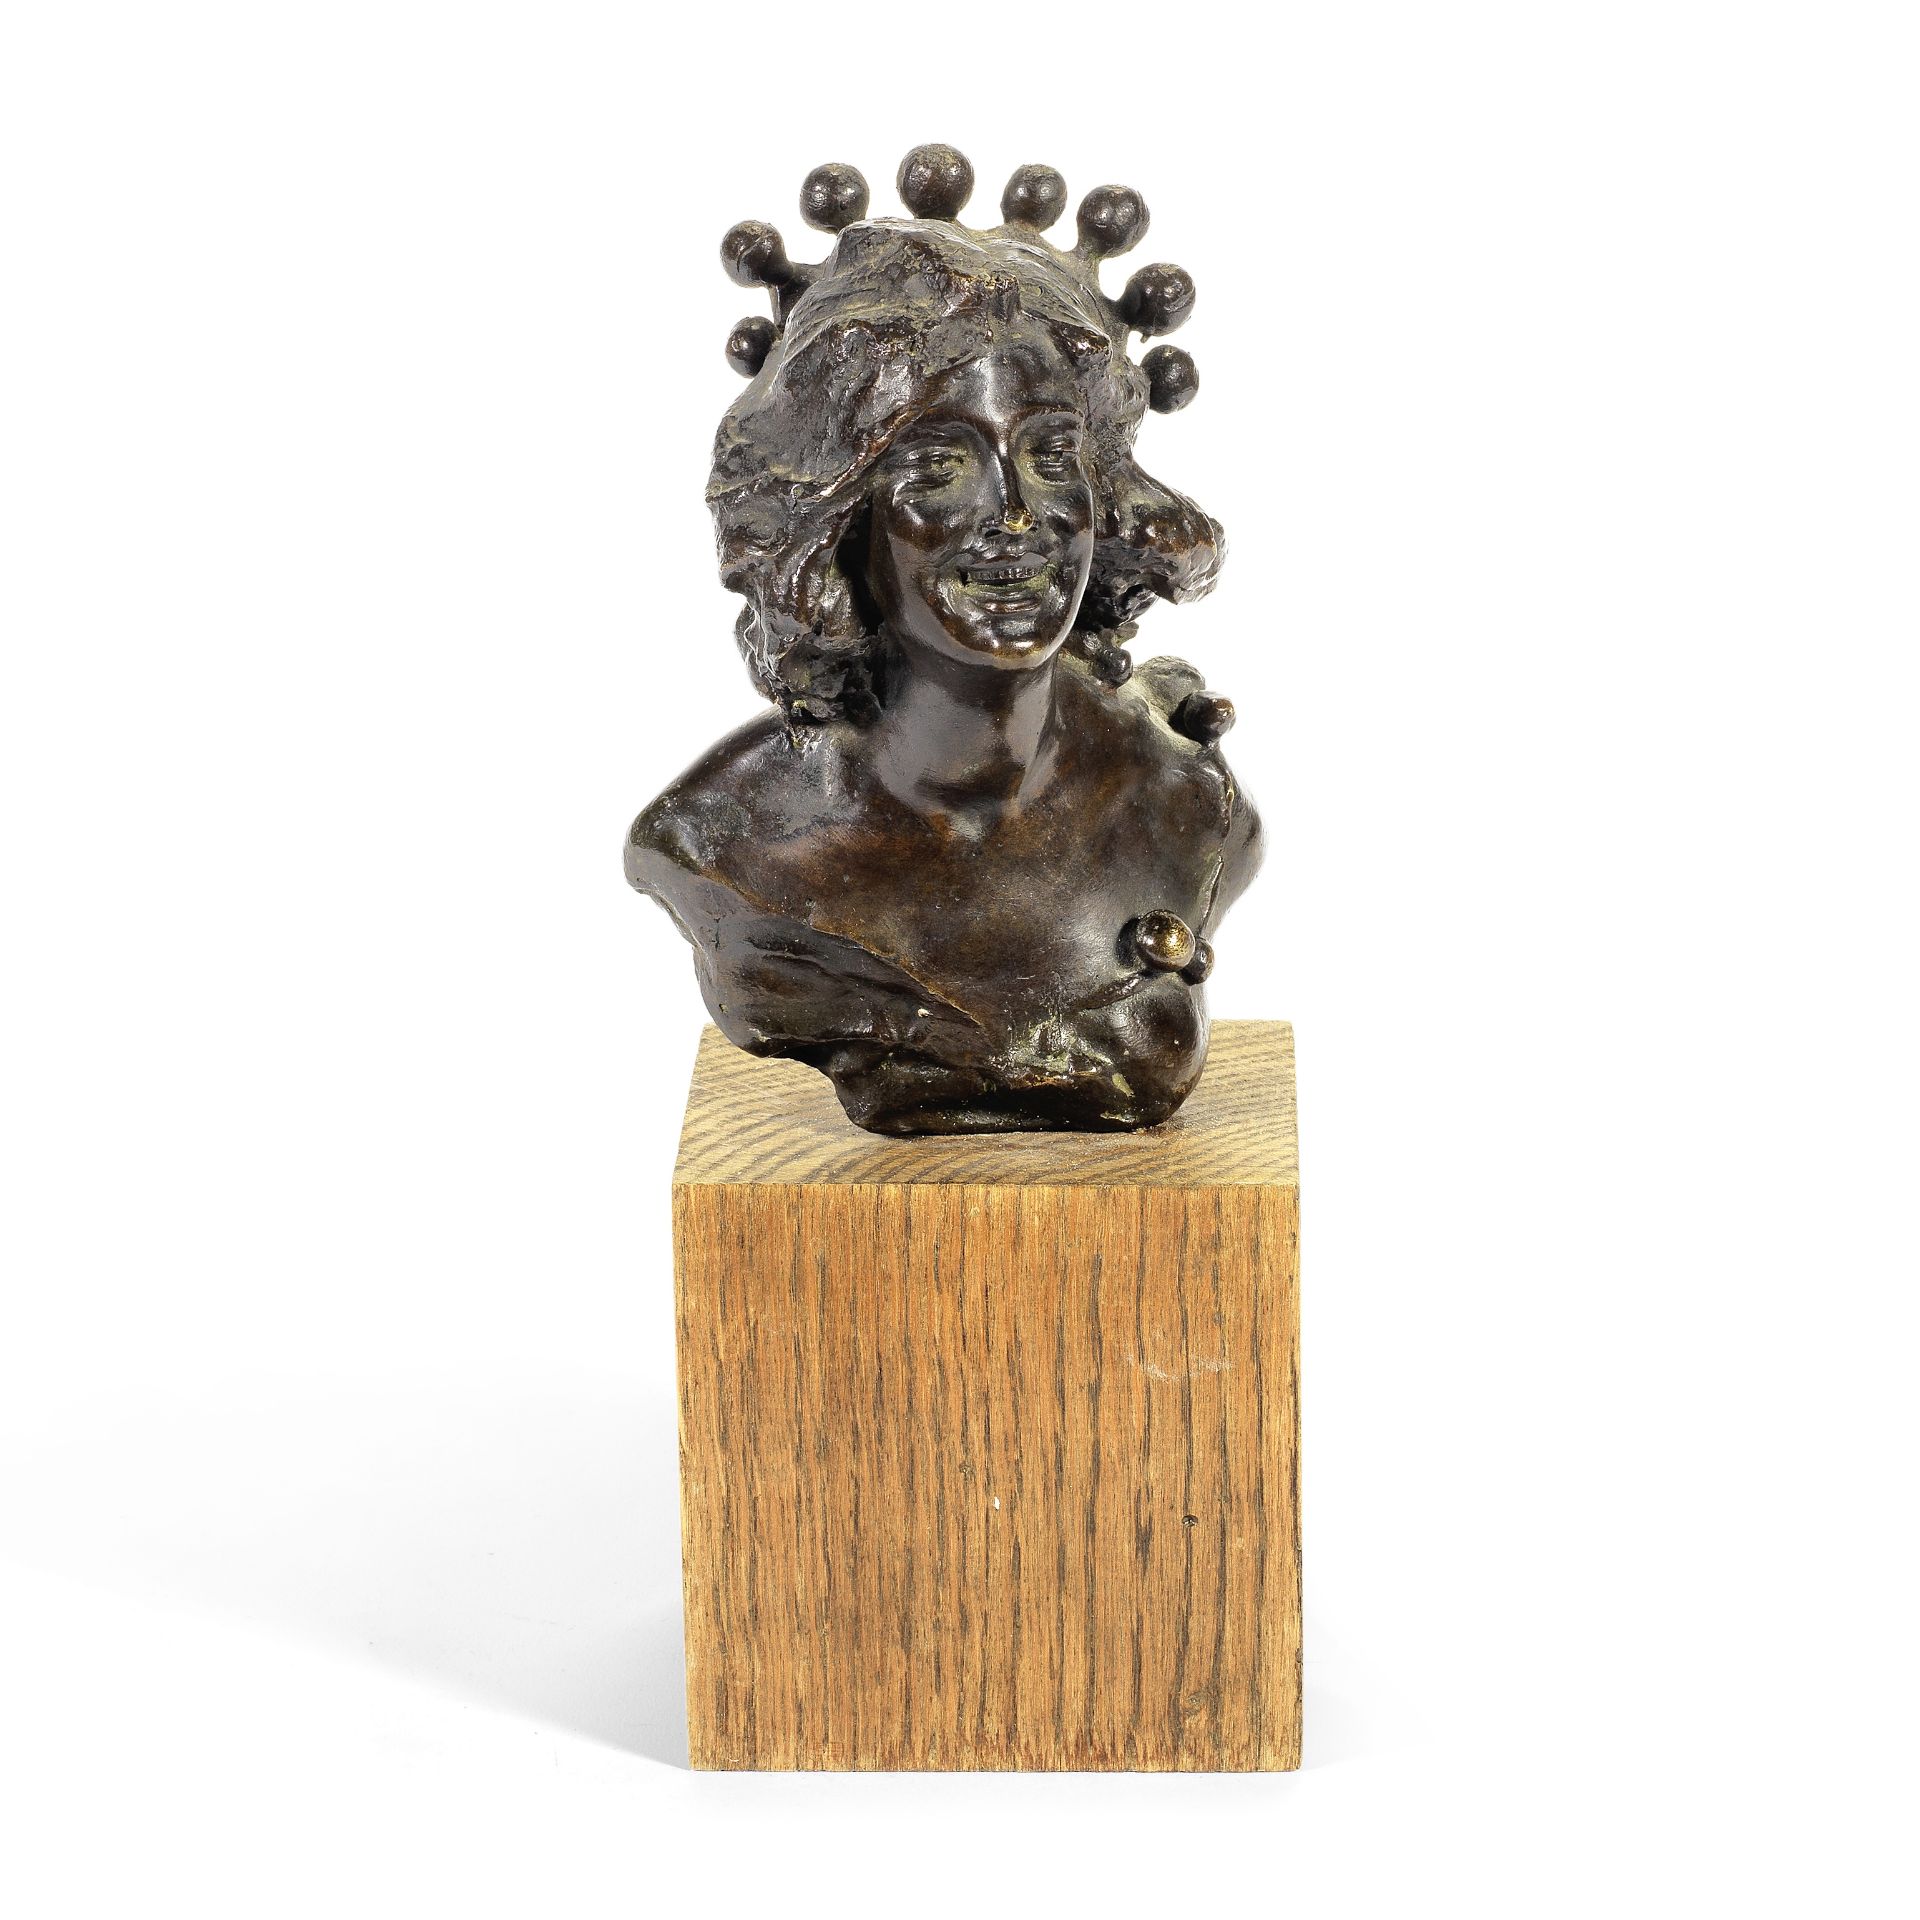 French school, late 19th / early 20th century: A small patinated bronze bust of a laughing girl